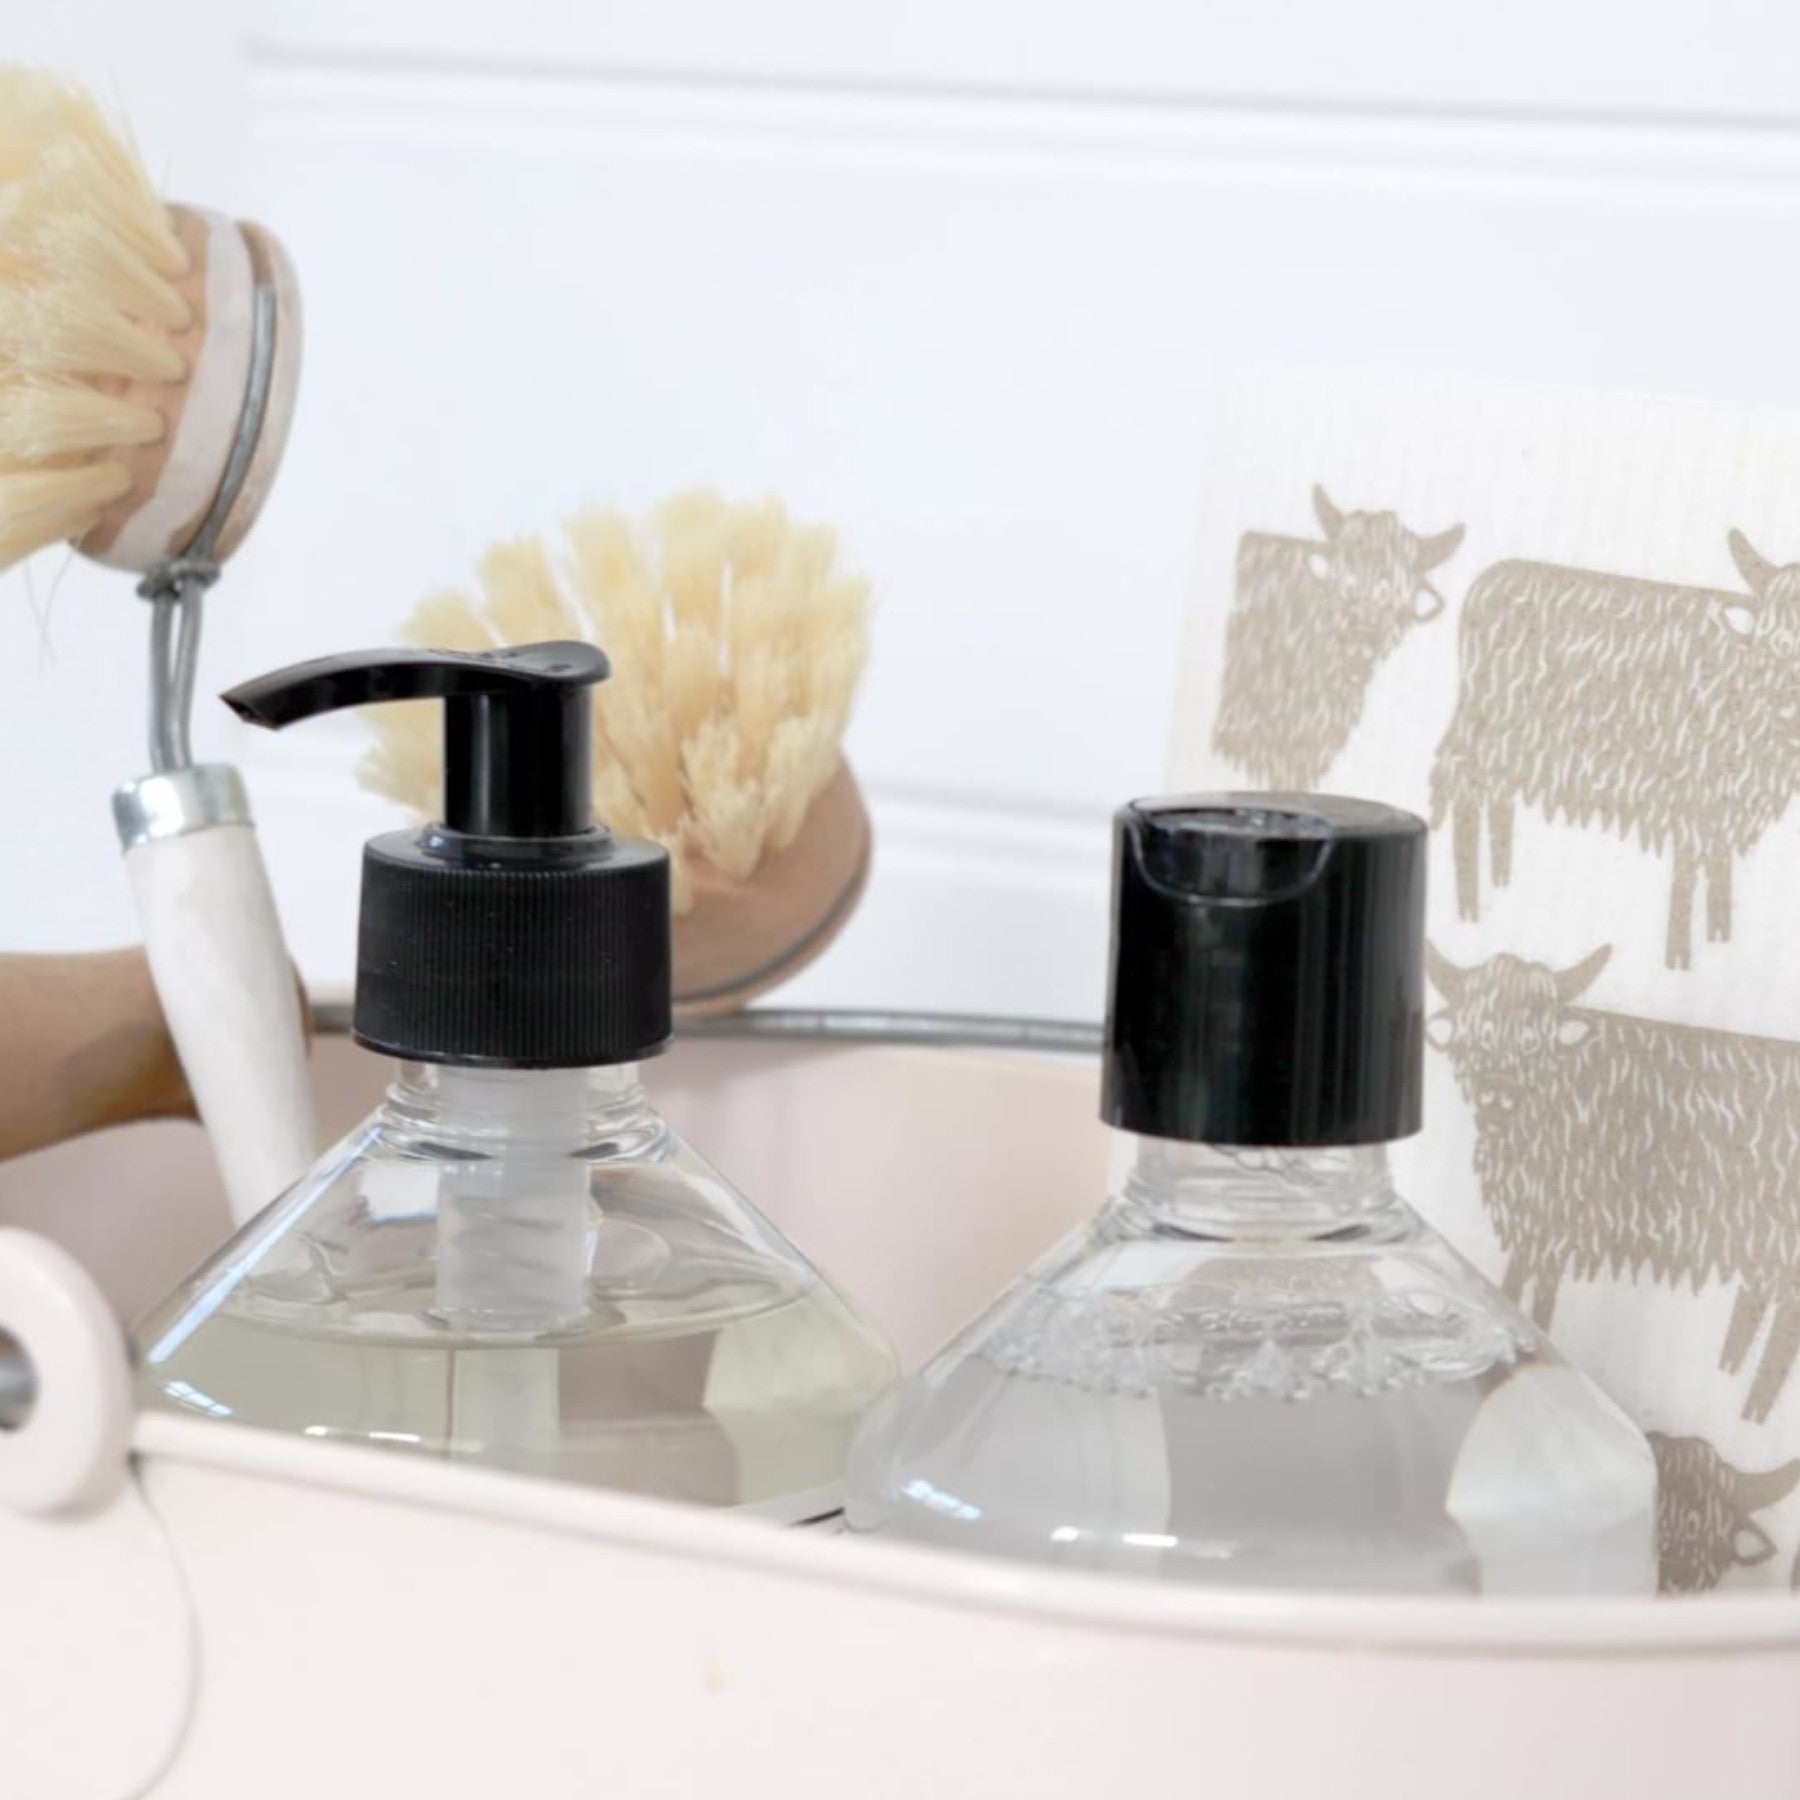 Bathroom counter with clear glass soap dispensers, natural sea sponge, and animal print towel in a modern home setting